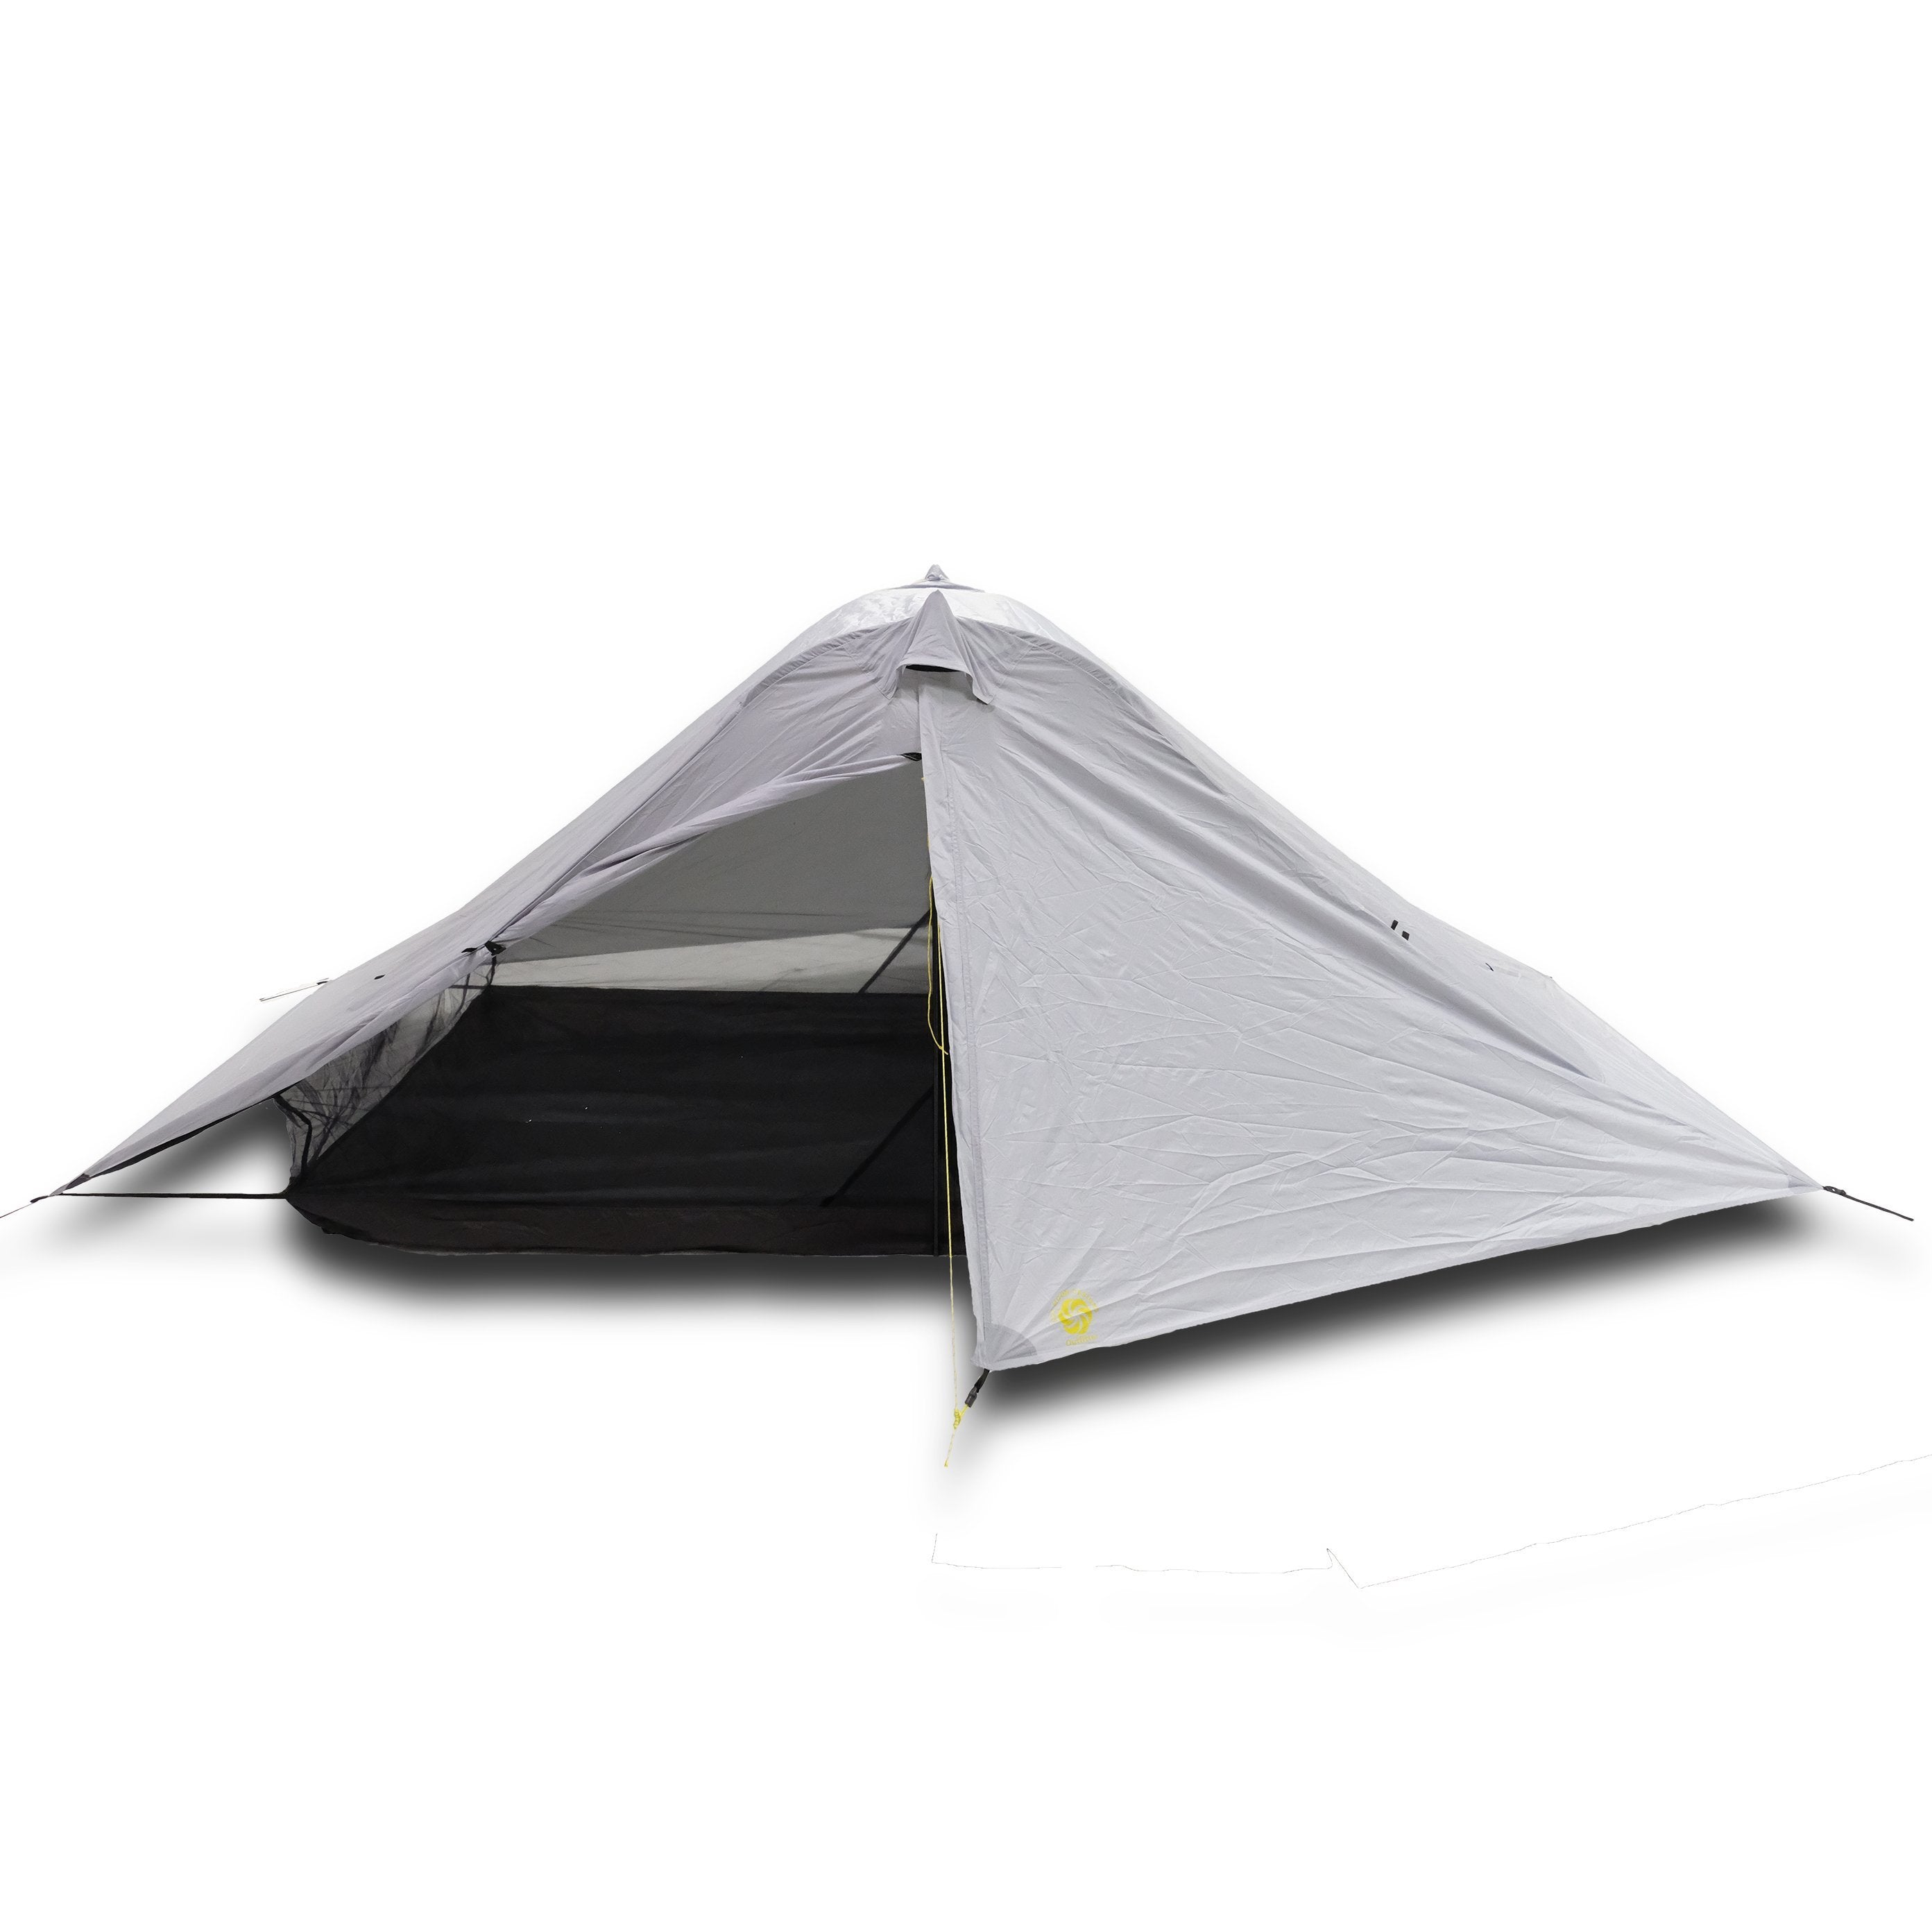 Lunar Solo - One Person Ultralight Tent - Six Moon Designs